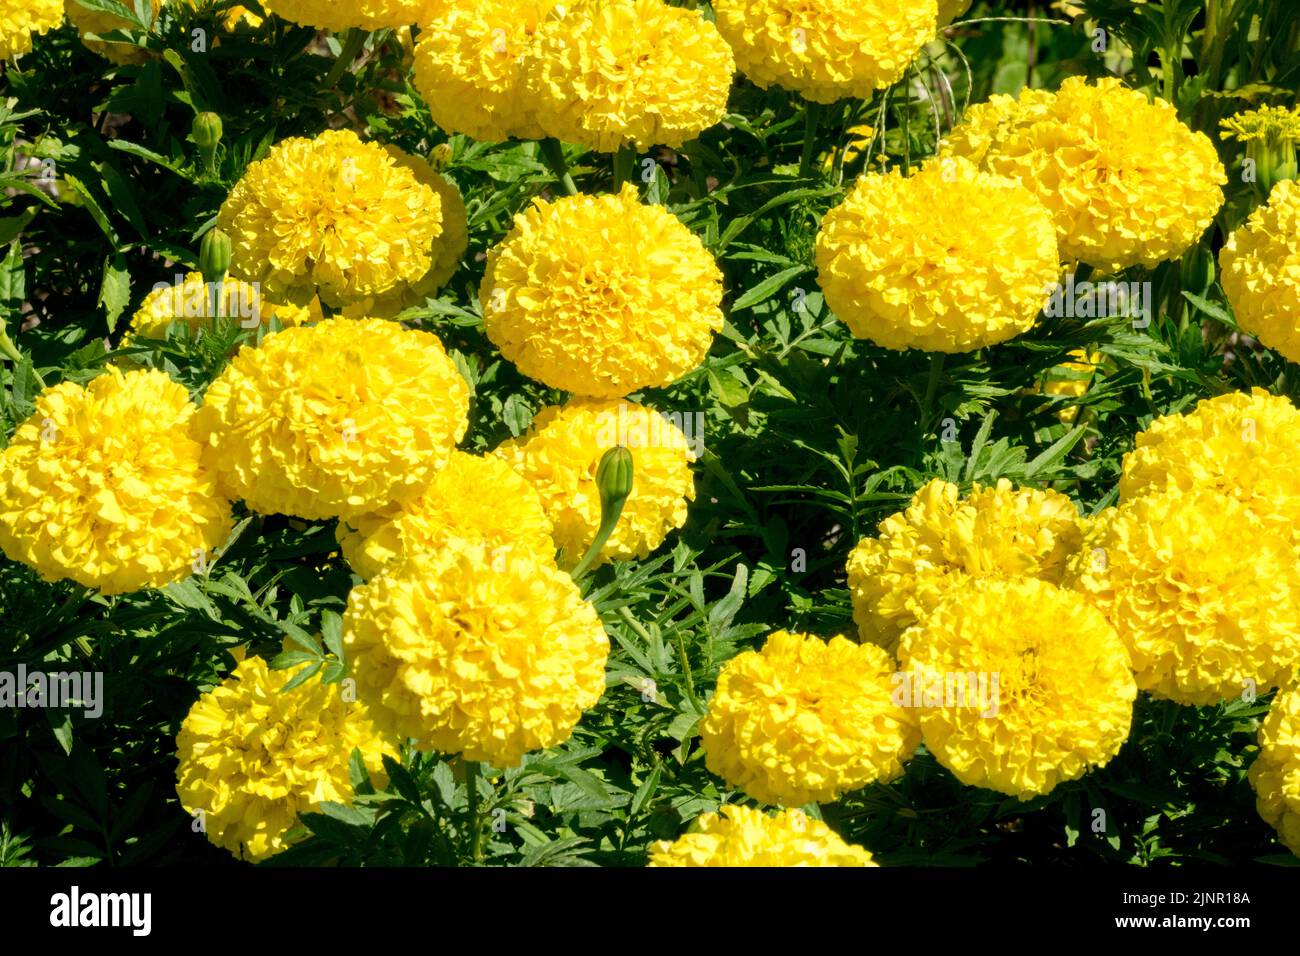 Yellow Marigolds Yellow Tagetes 'Lady First' Bedding Plant Tagetes erecta African Marigold Blooming lit de fleurs fleurs Blooming août floraison Banque D'Images